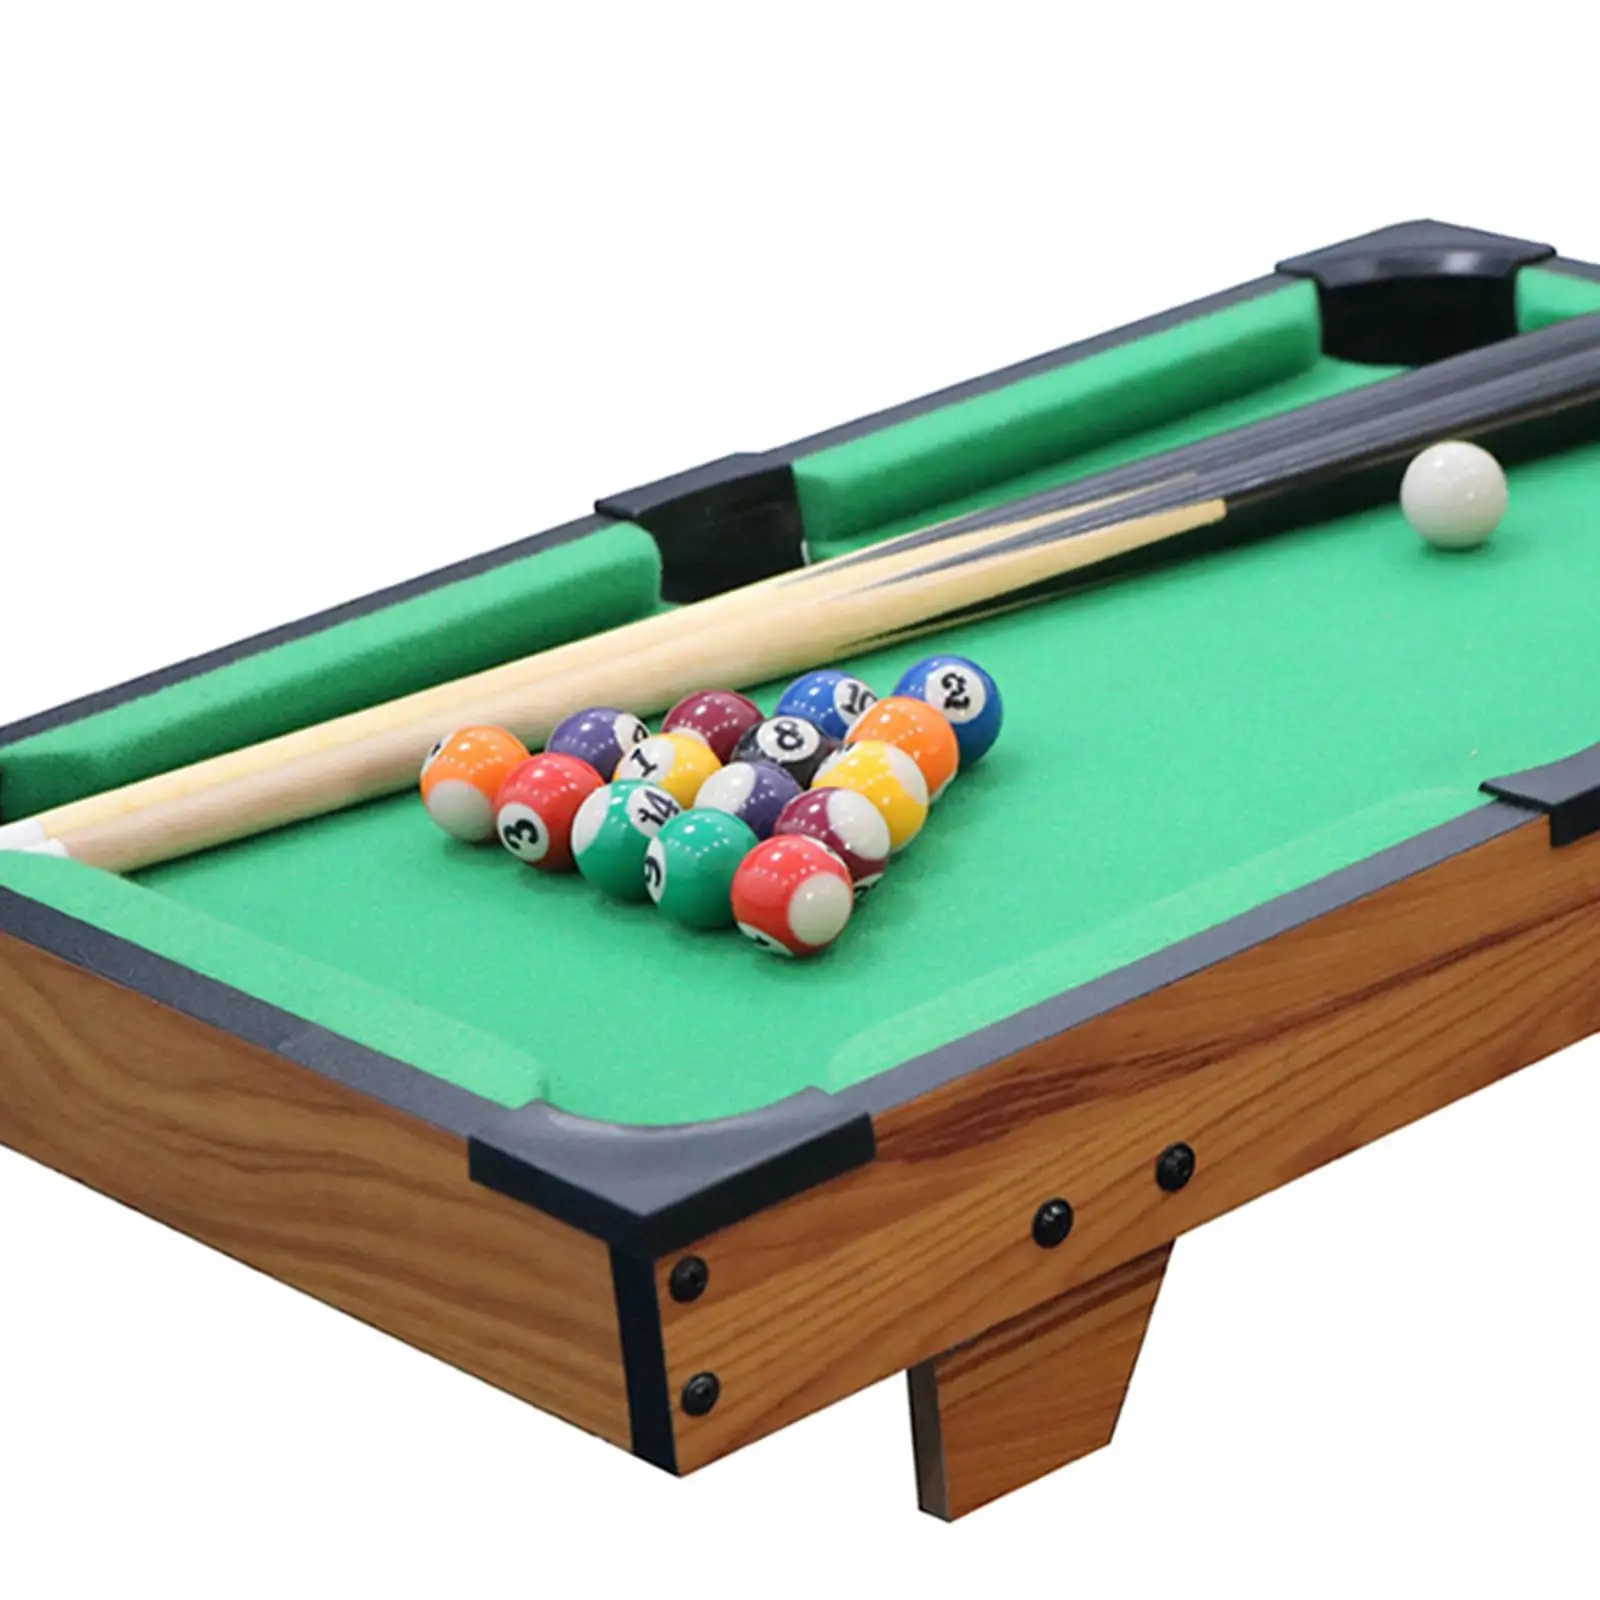 Snooker Miniature Cues with 2 Sticks Felt Surface Colorful Balls Play Mini Table pool for Entertainment Family travel